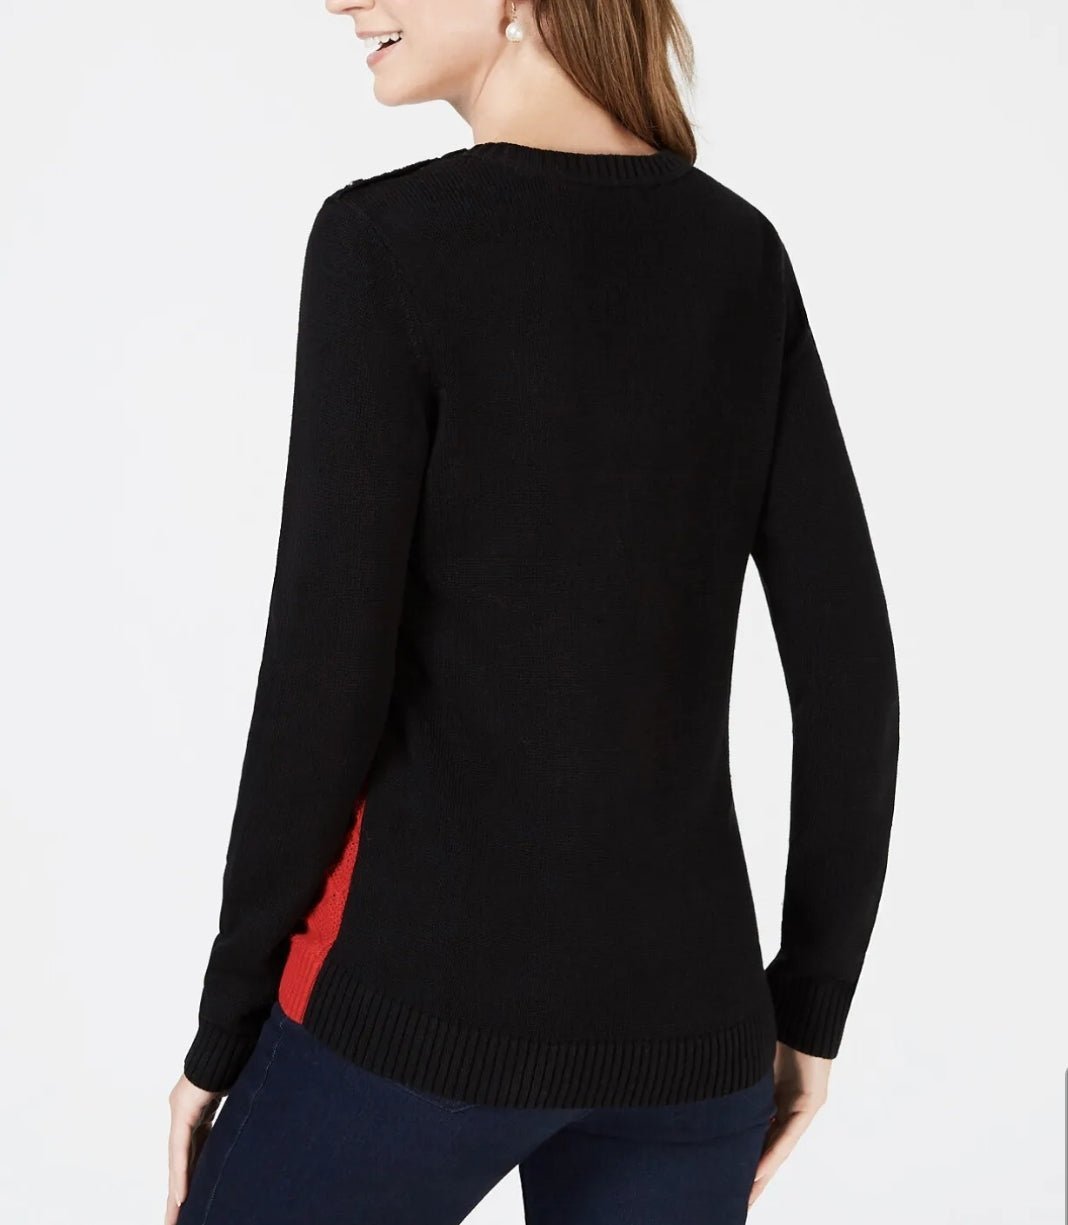 Charter Club Women's Colorblocked Cable-Knit Sweater Deep Black Combo Size XL - BELLEZA'S - Charter Club Women's Colorblocked Cable-Knit Sweater Deep Black Combo Size XL - BELLEZA'S - Sweater -